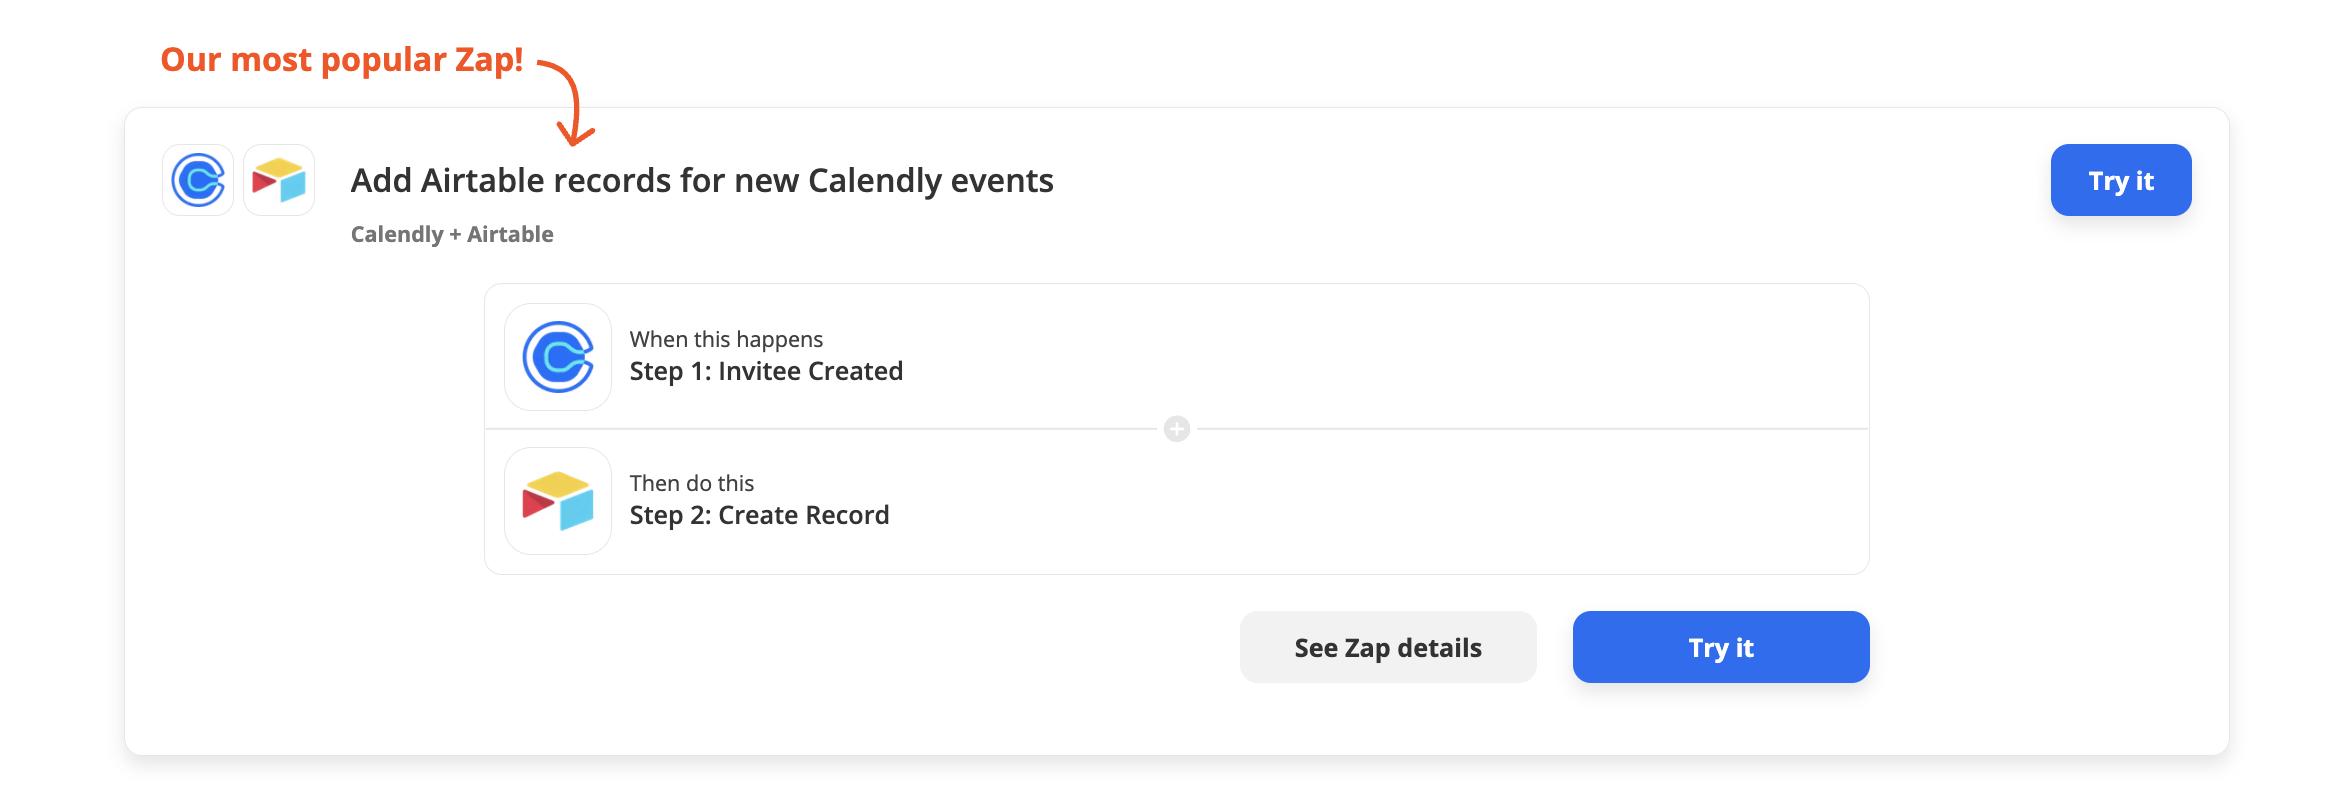 With the Calendly + Airtable zap, scheduling a new event in Calendly triggers Airtable to create or update records.